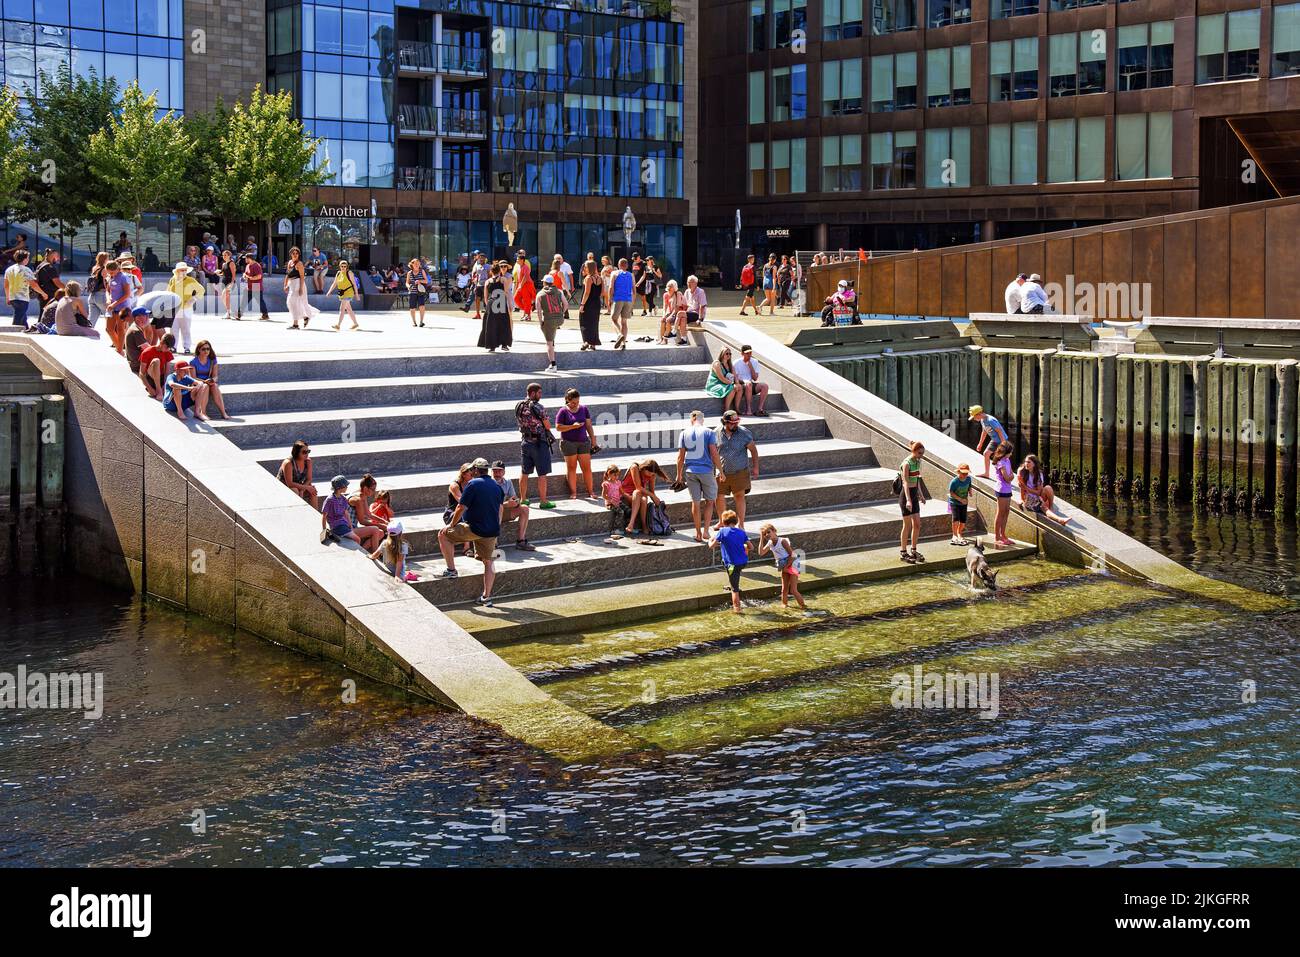 Halifax, Nova Scotia - July 31, 2022: People on the stairs that lead into Halifax Harbour. The stairs located at Queen's Landing were opened in Stock Photo